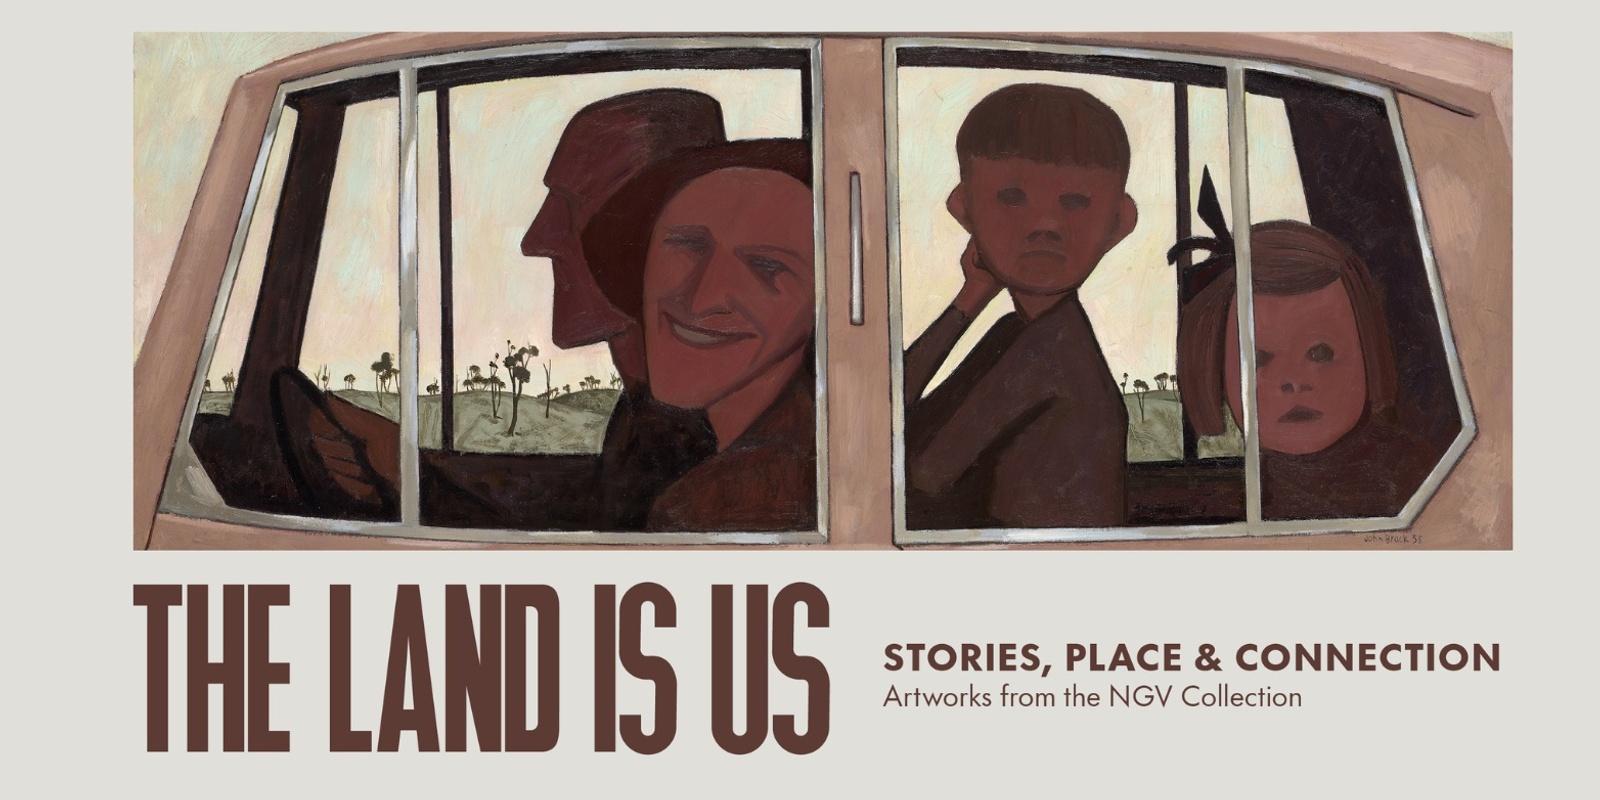 Exhibition opening celebration The Land is Us: Stories, Place